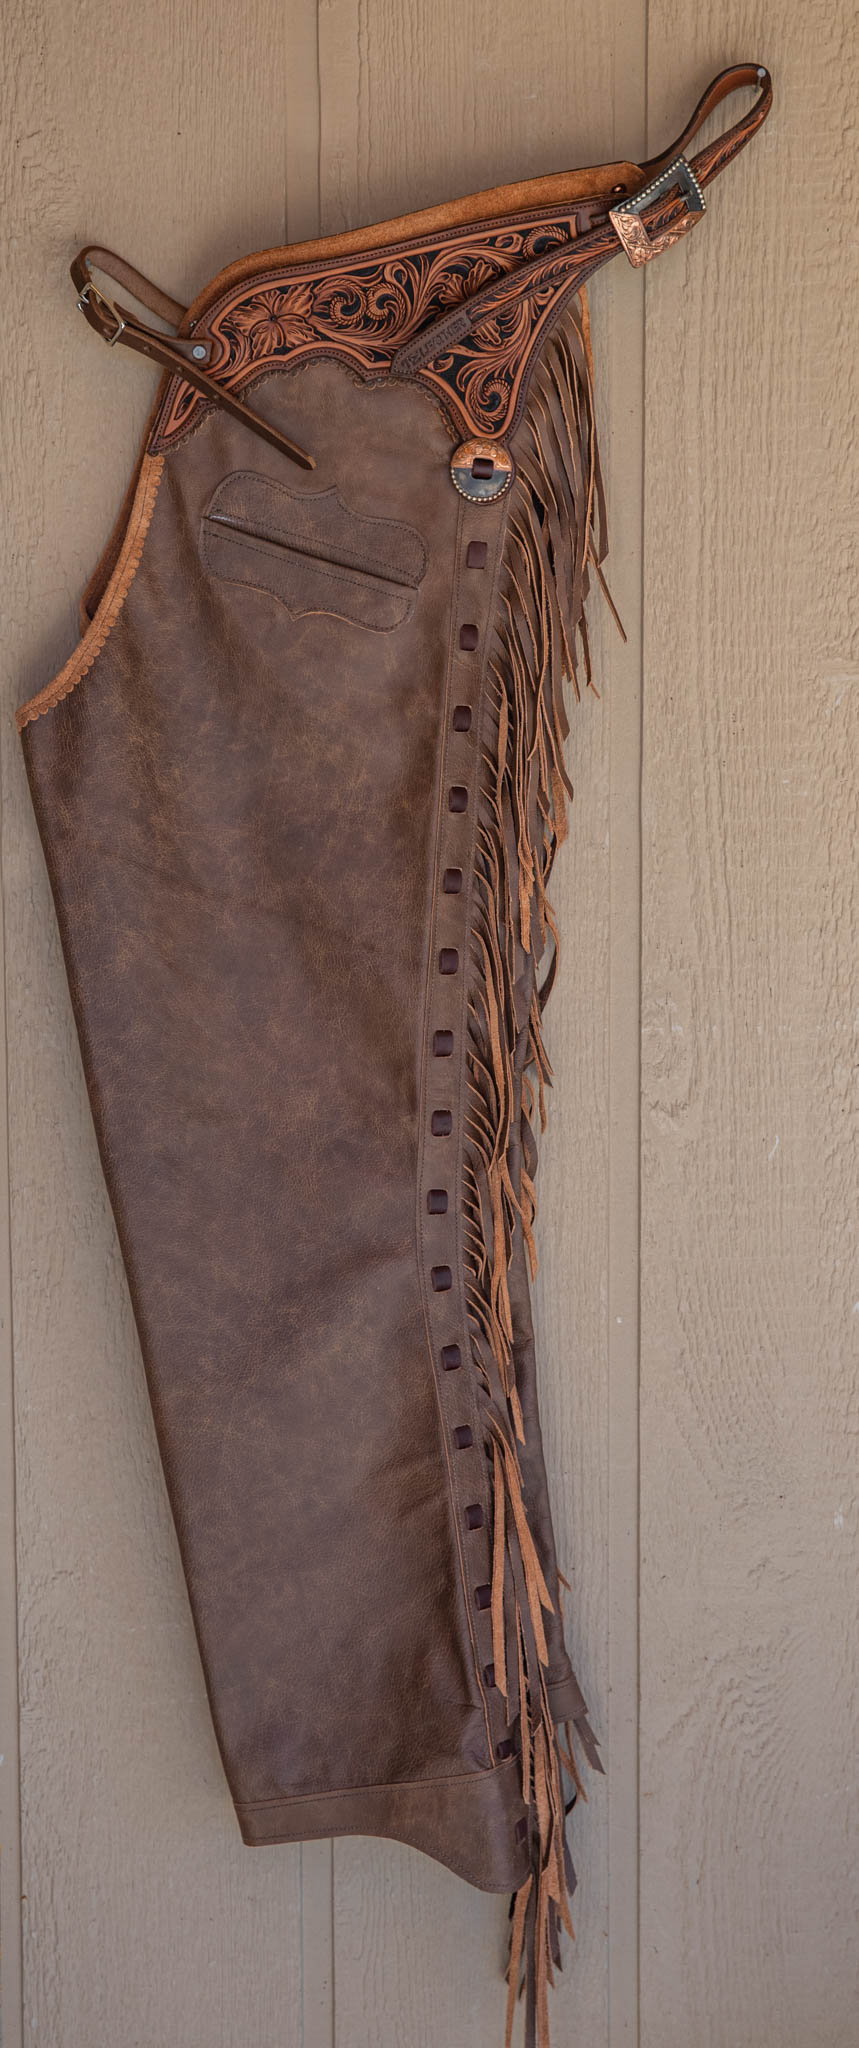 Rum Smooth-out Chaps w/ Black, Walnut & Light Brown Floral Yokes and Pocket